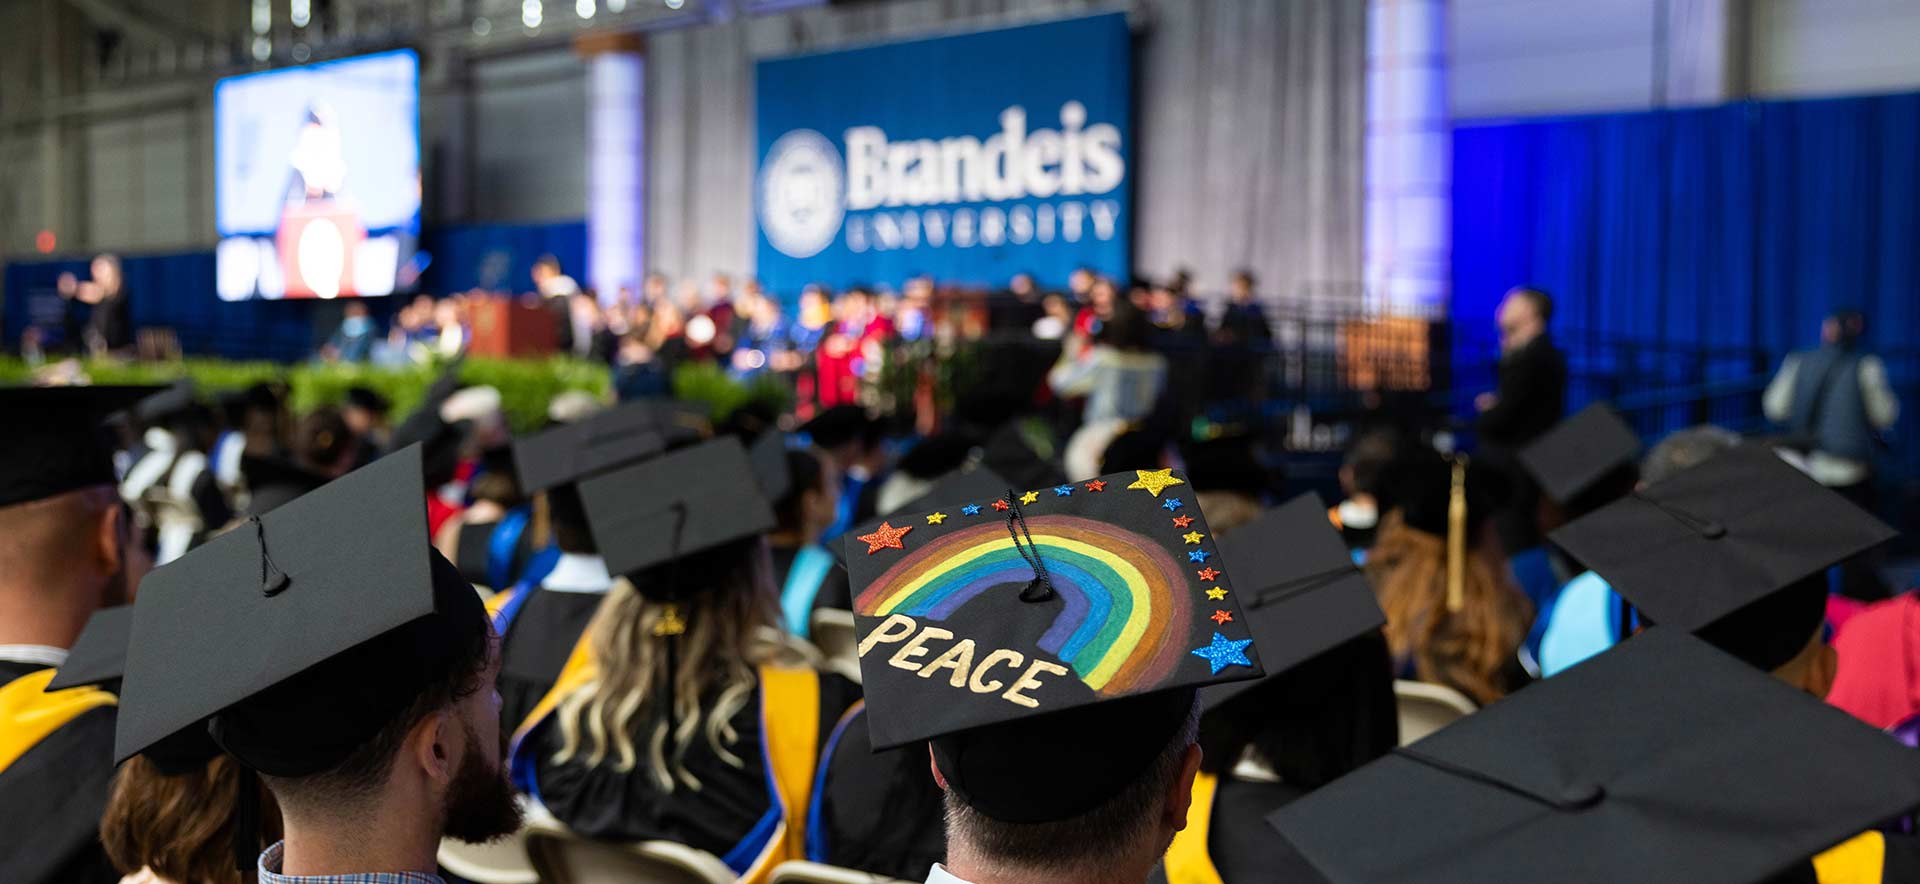 Close up of a graduation cap with a rainbow and the word "Peace" with the Commencement stage in the background